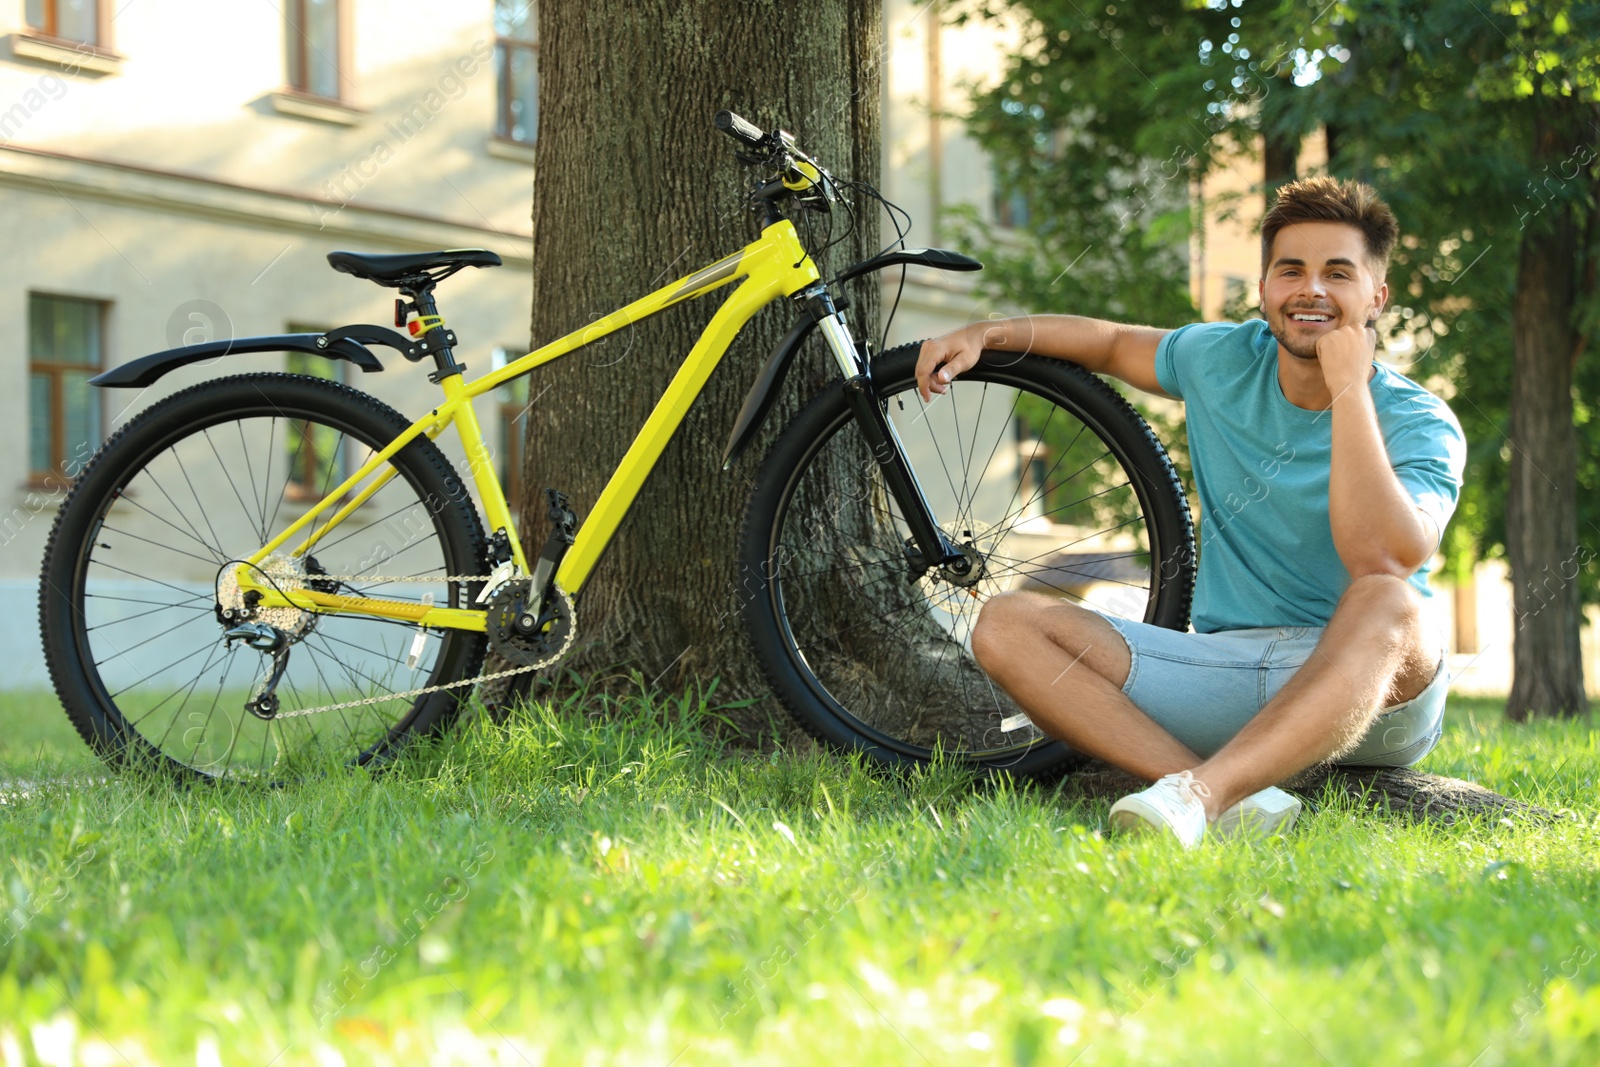 Photo of Handsome young man sitting near bicycle on green grass